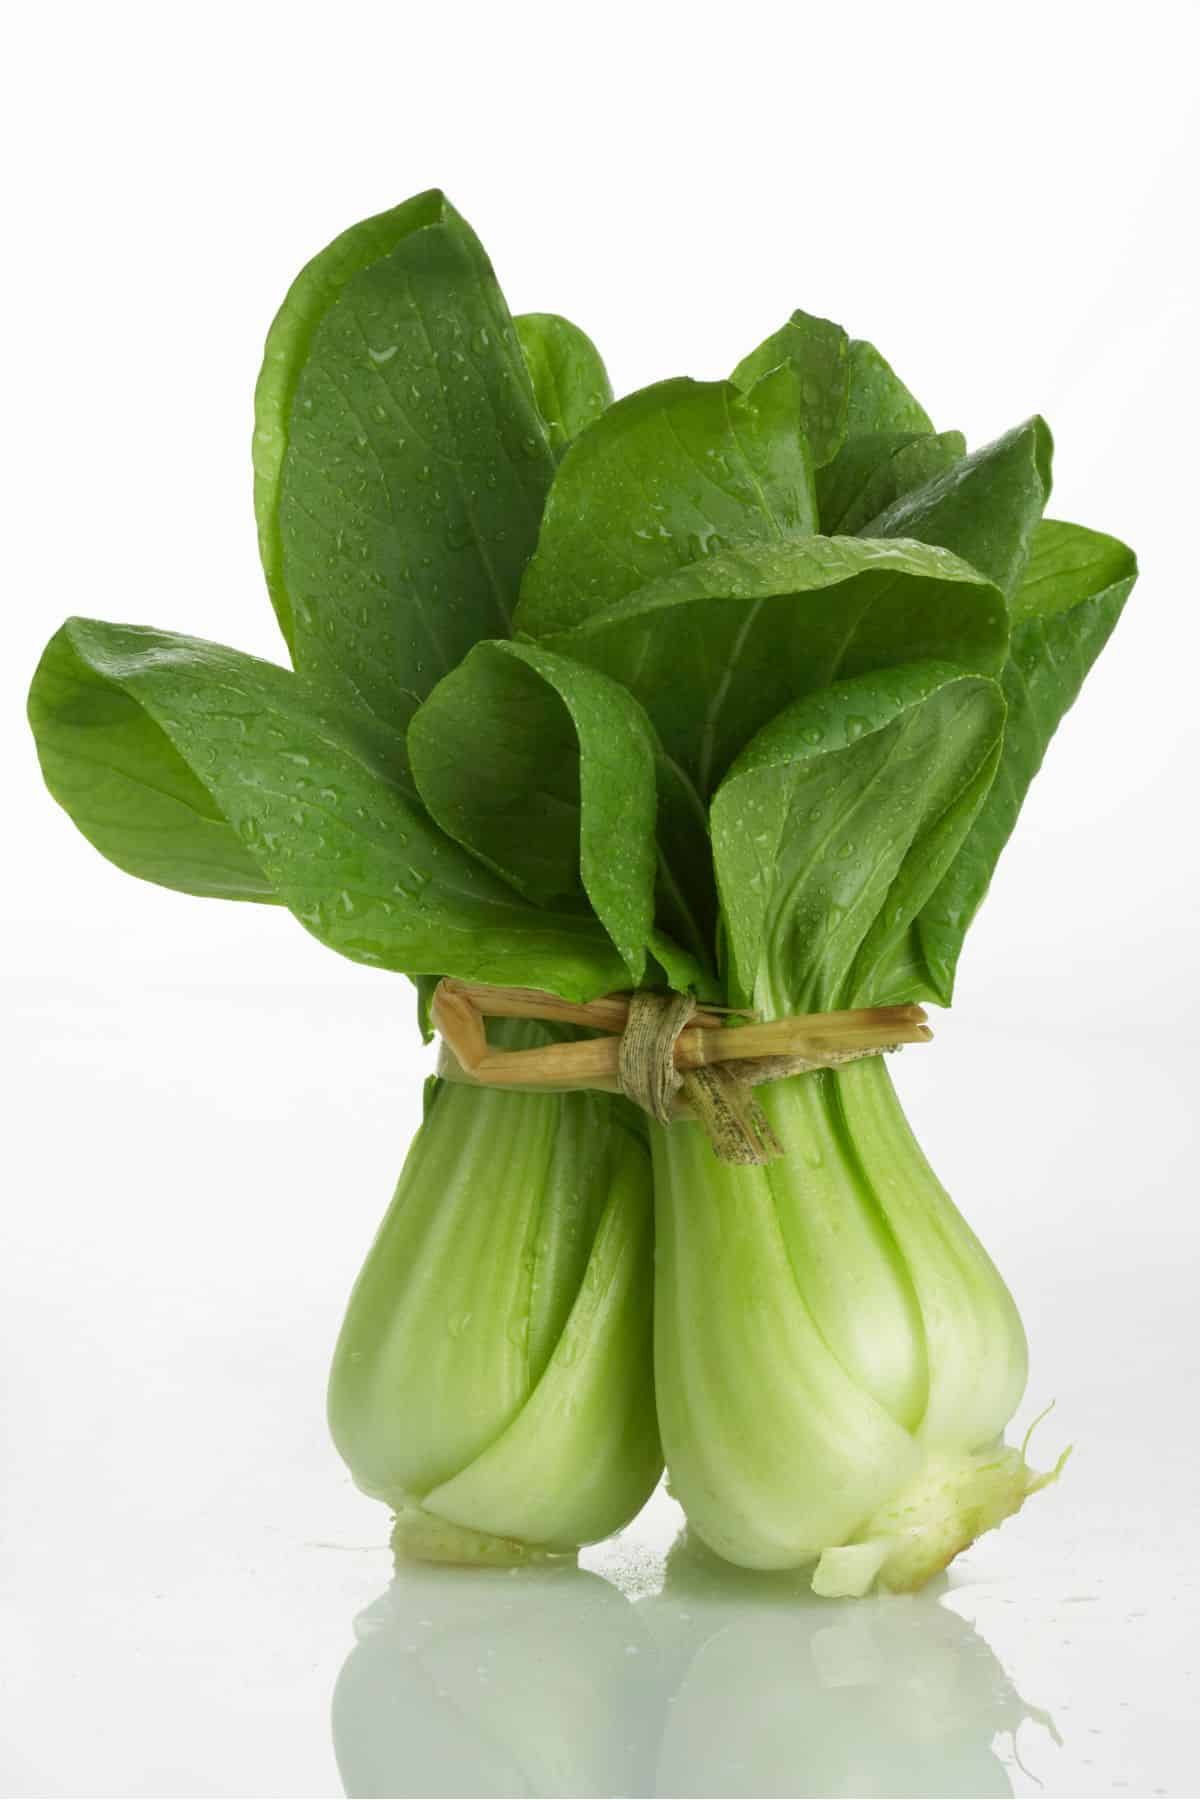 Stalks of Bok choy tied together on white background.